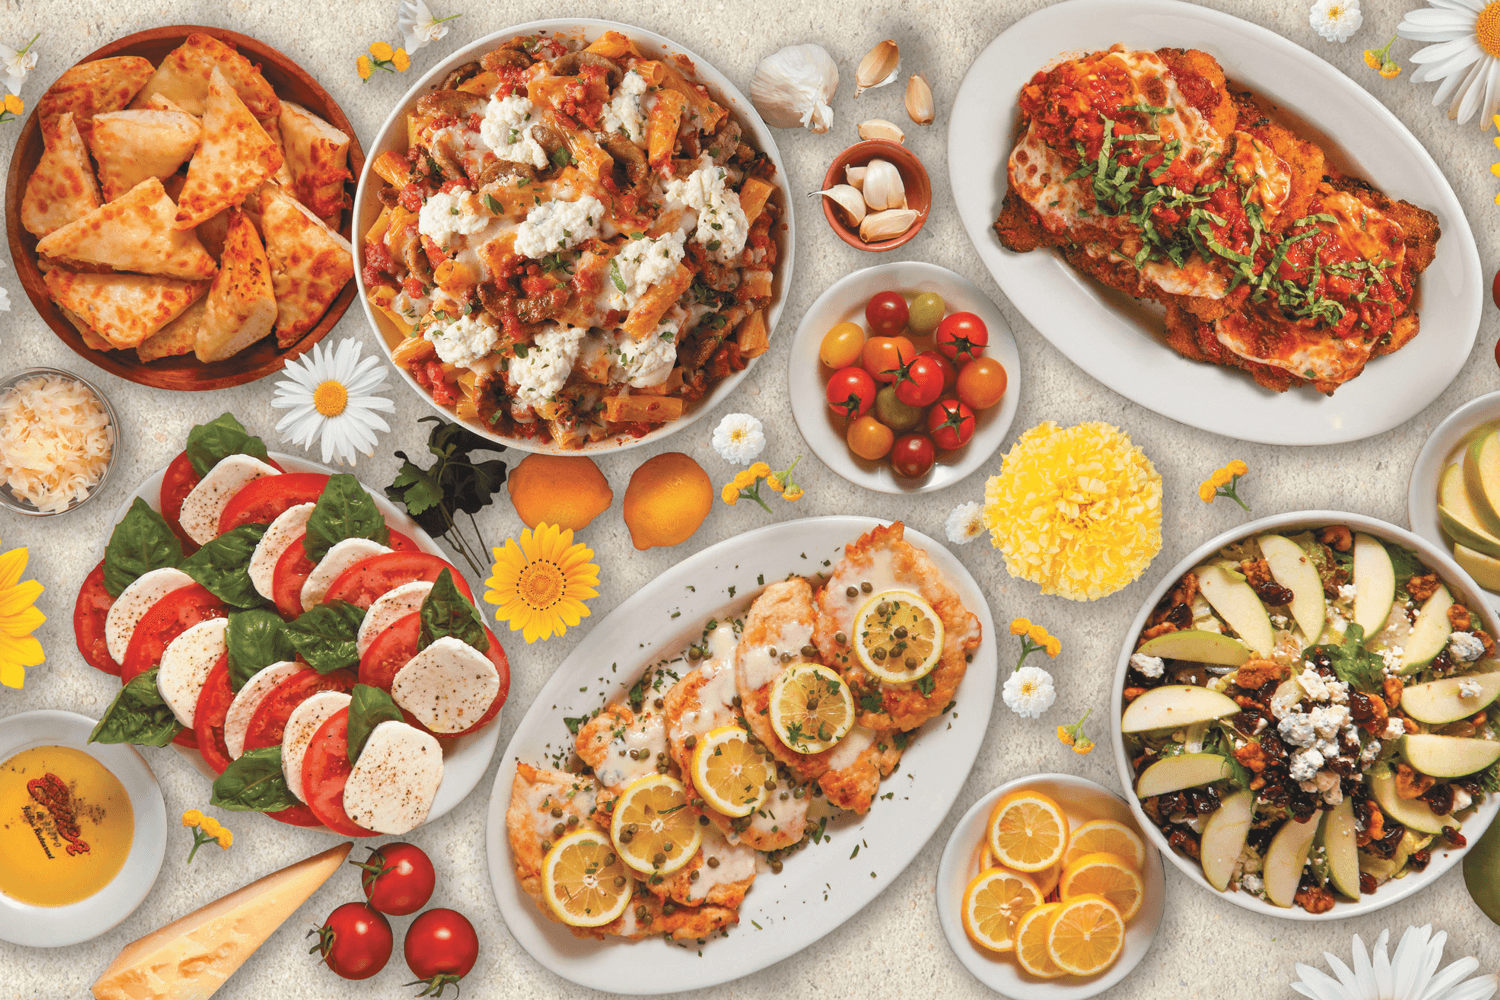 A spread of entrees and side dishes with Spring decor from Buca di Beppo